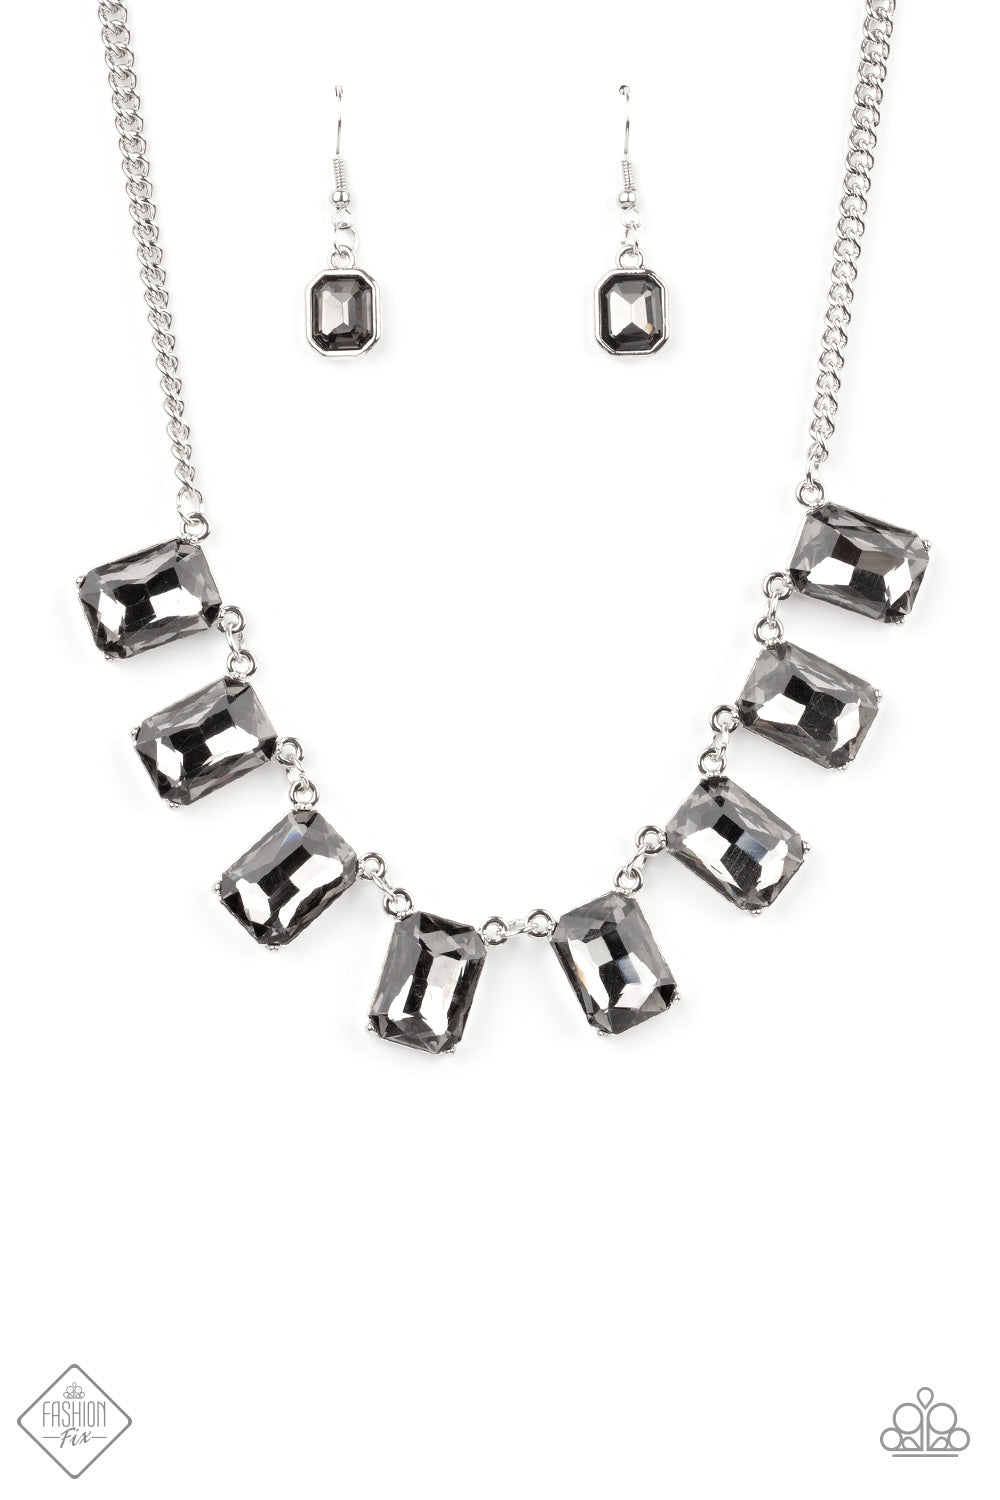 Paparazzi After Party Access Silver Short Necklace - Fashion Fix Magnificent Musings January 2021